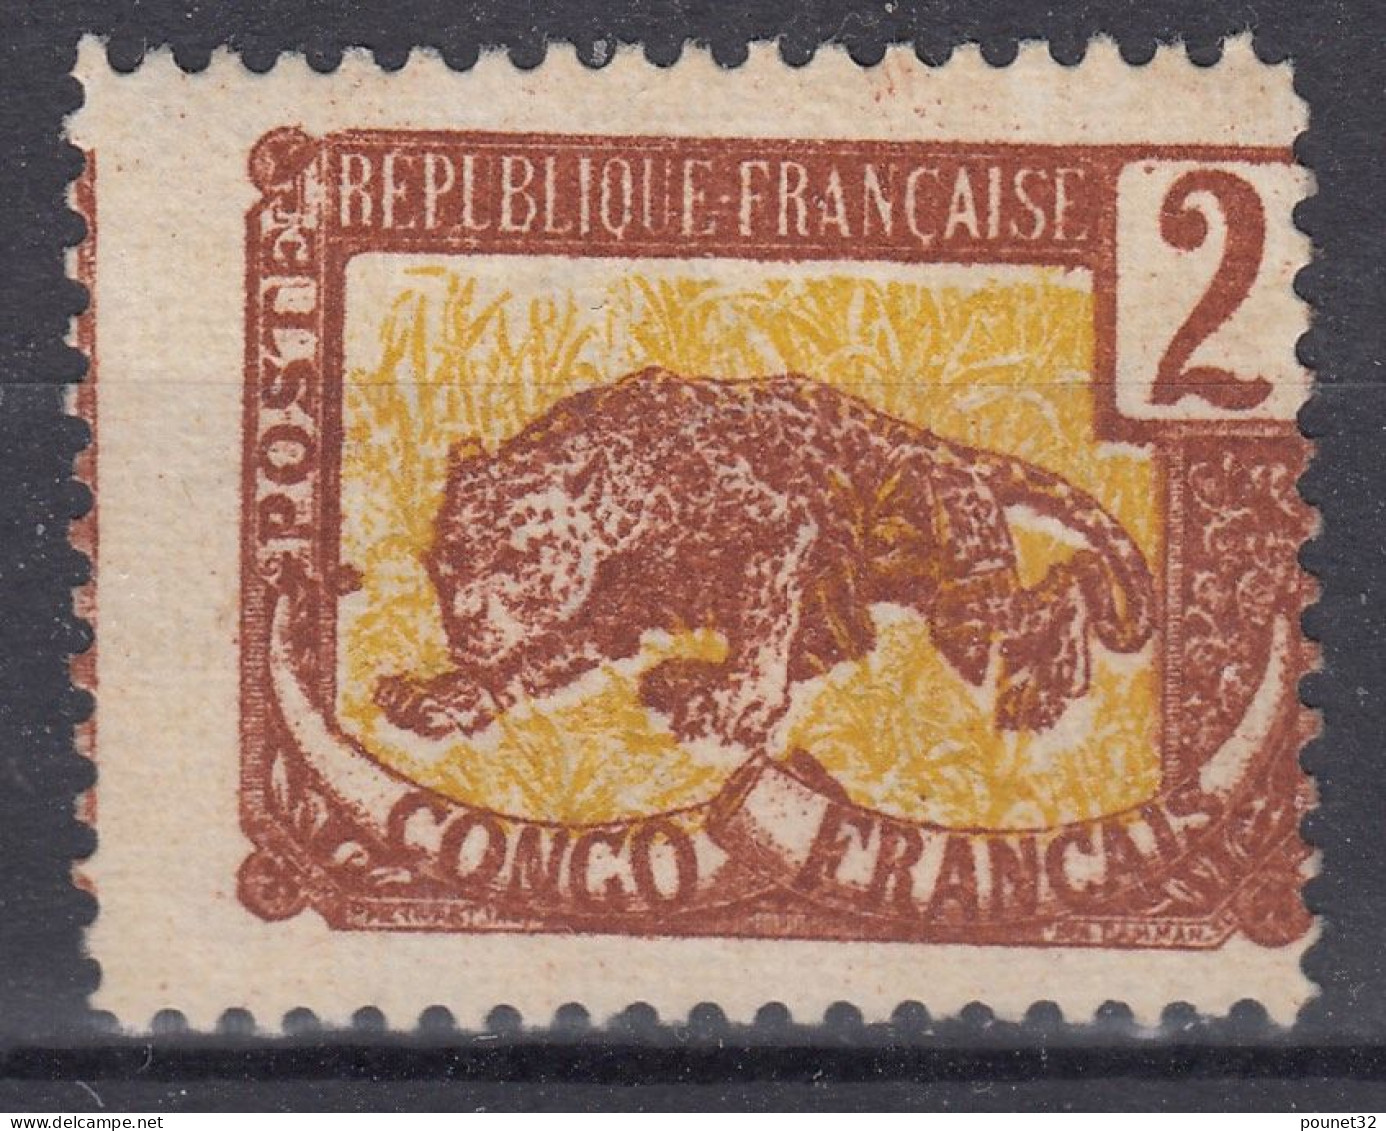 CONGO PANTHERE N° 28f VARIETE PIQUAGE A CHEVAL NEUF ** GOMME SANS CHARNIERE - Unused Stamps